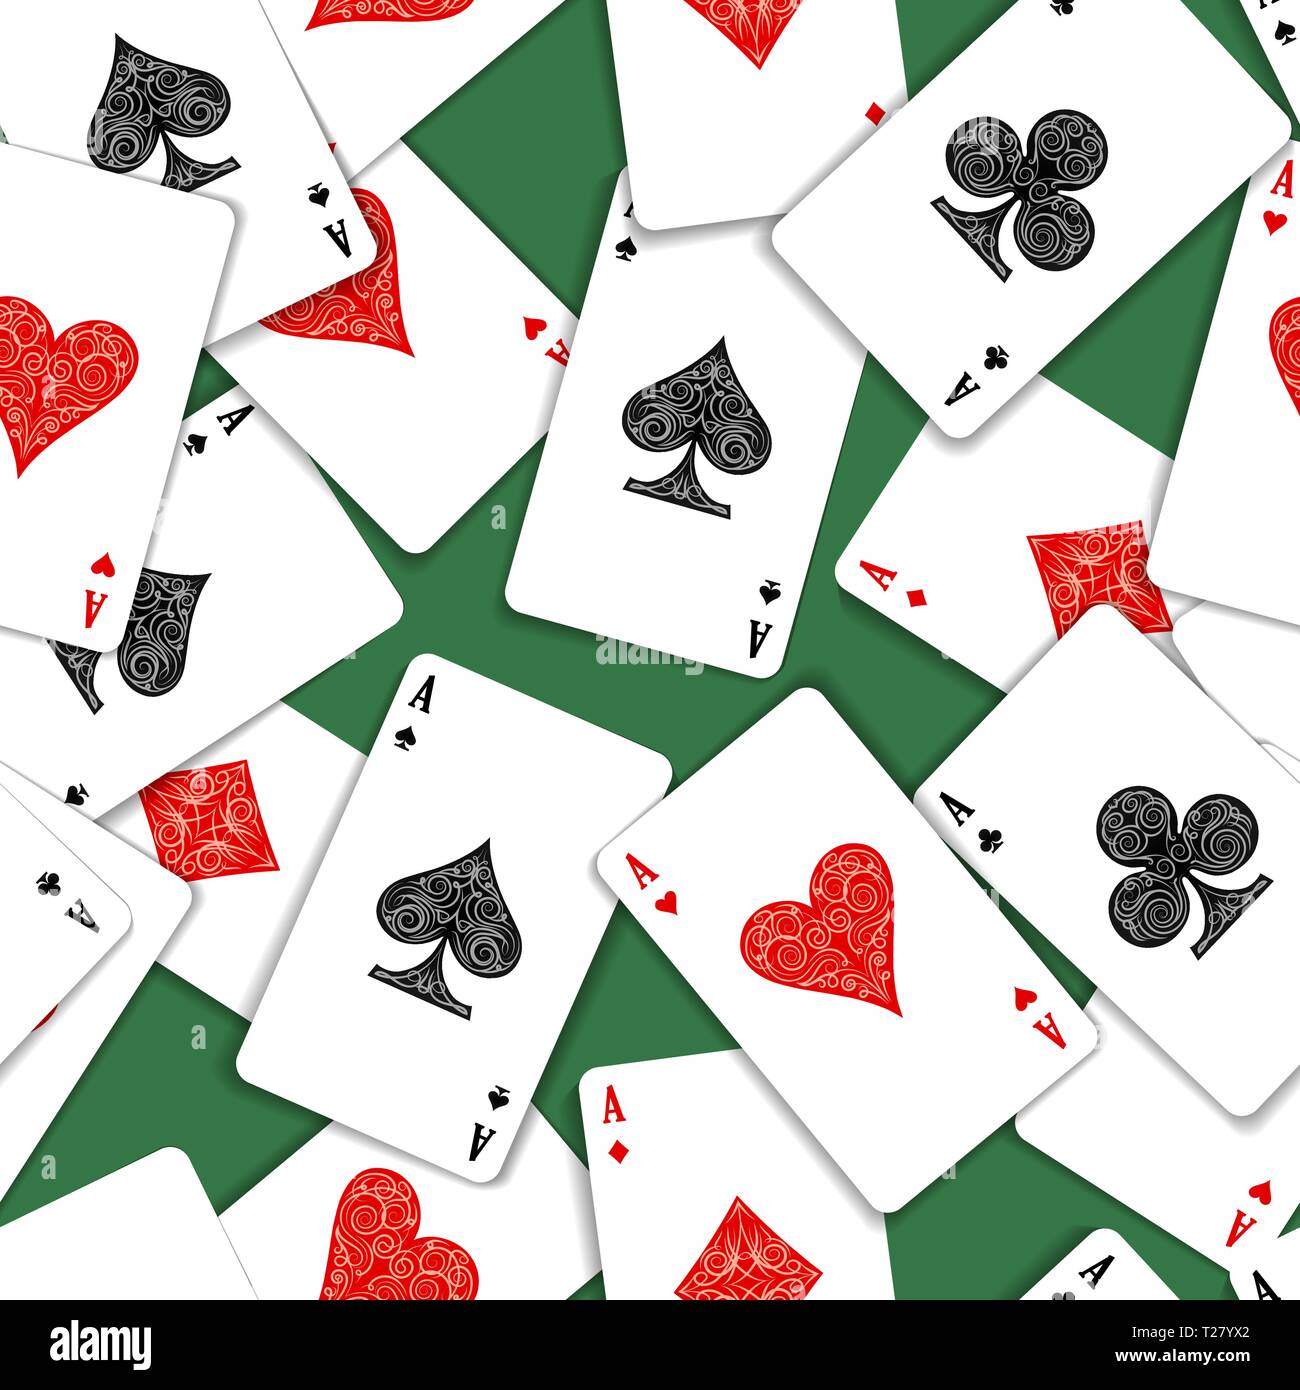 Aces Playing Cards on Green green Casino Table seamless Pattern. Vector illustration. Stock Vector